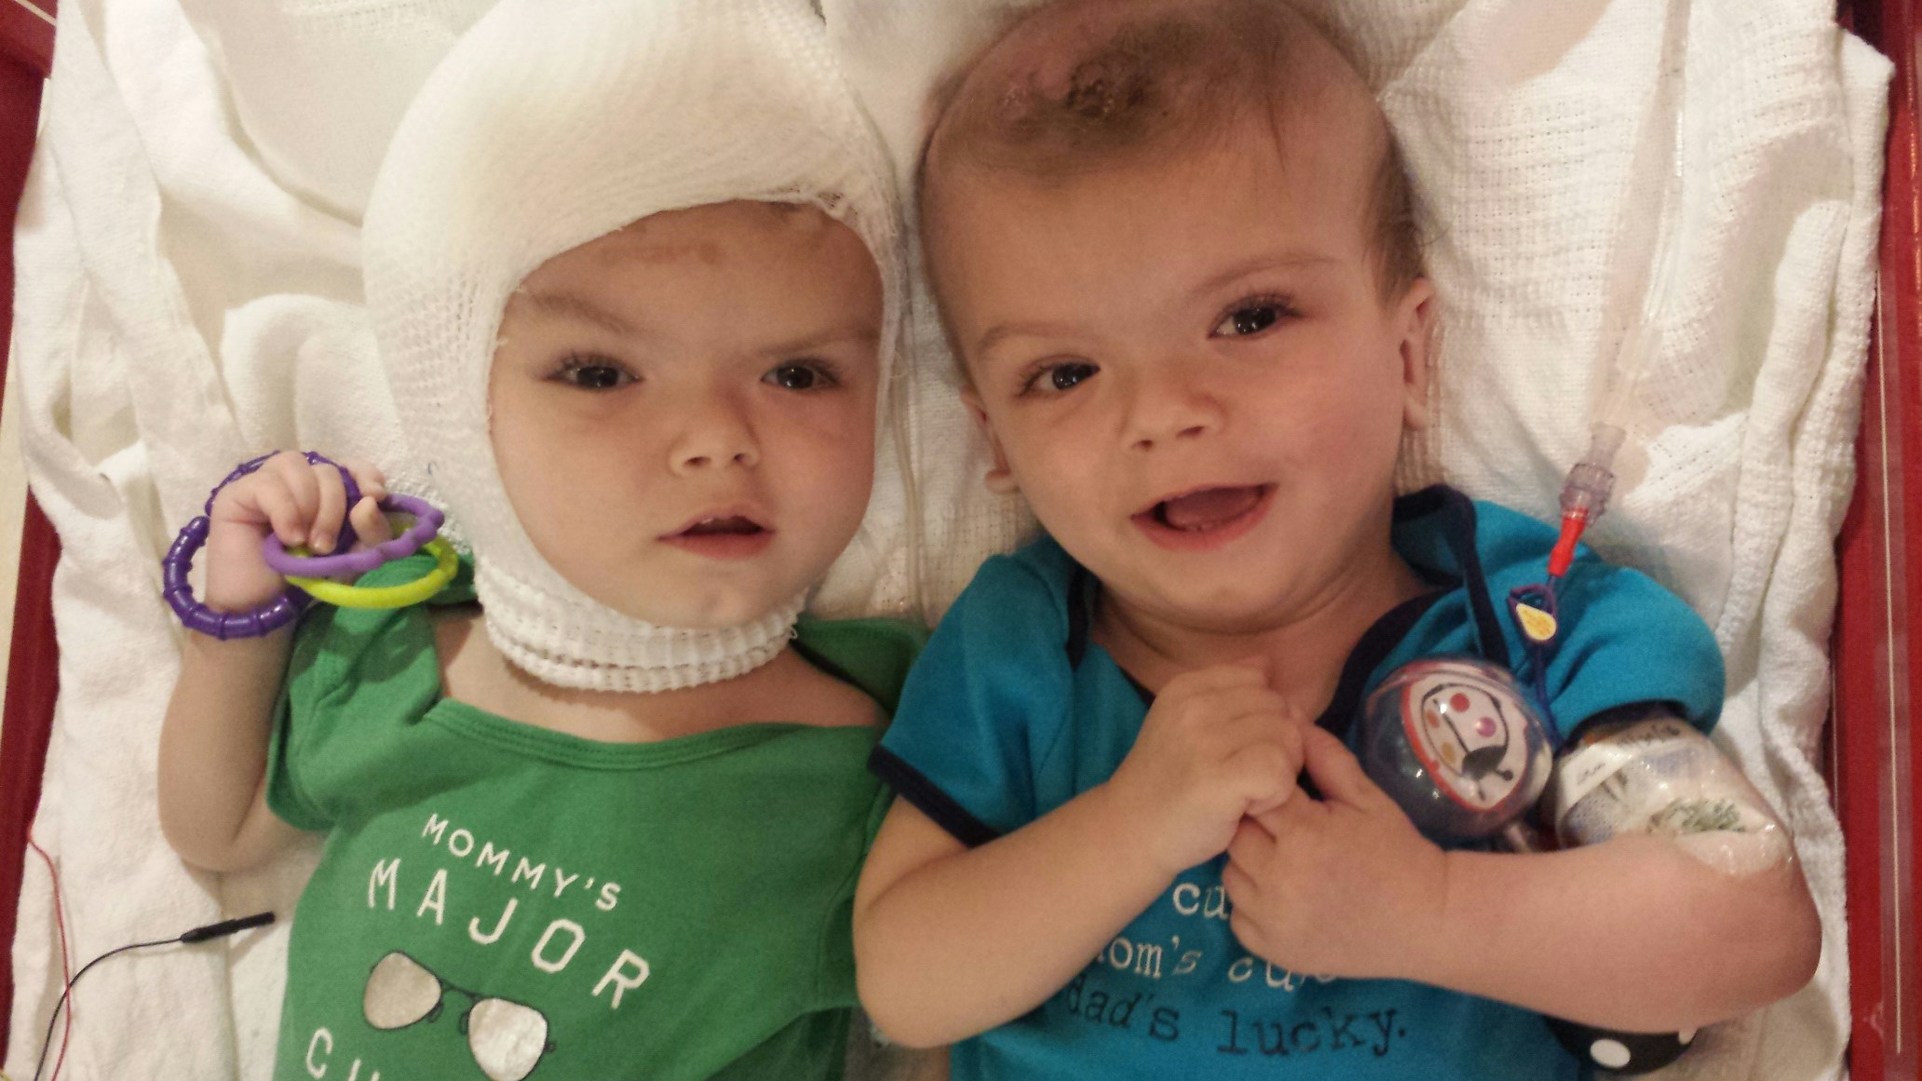 Separate But Together Formerly Conjoined Twins Jadon and Anias